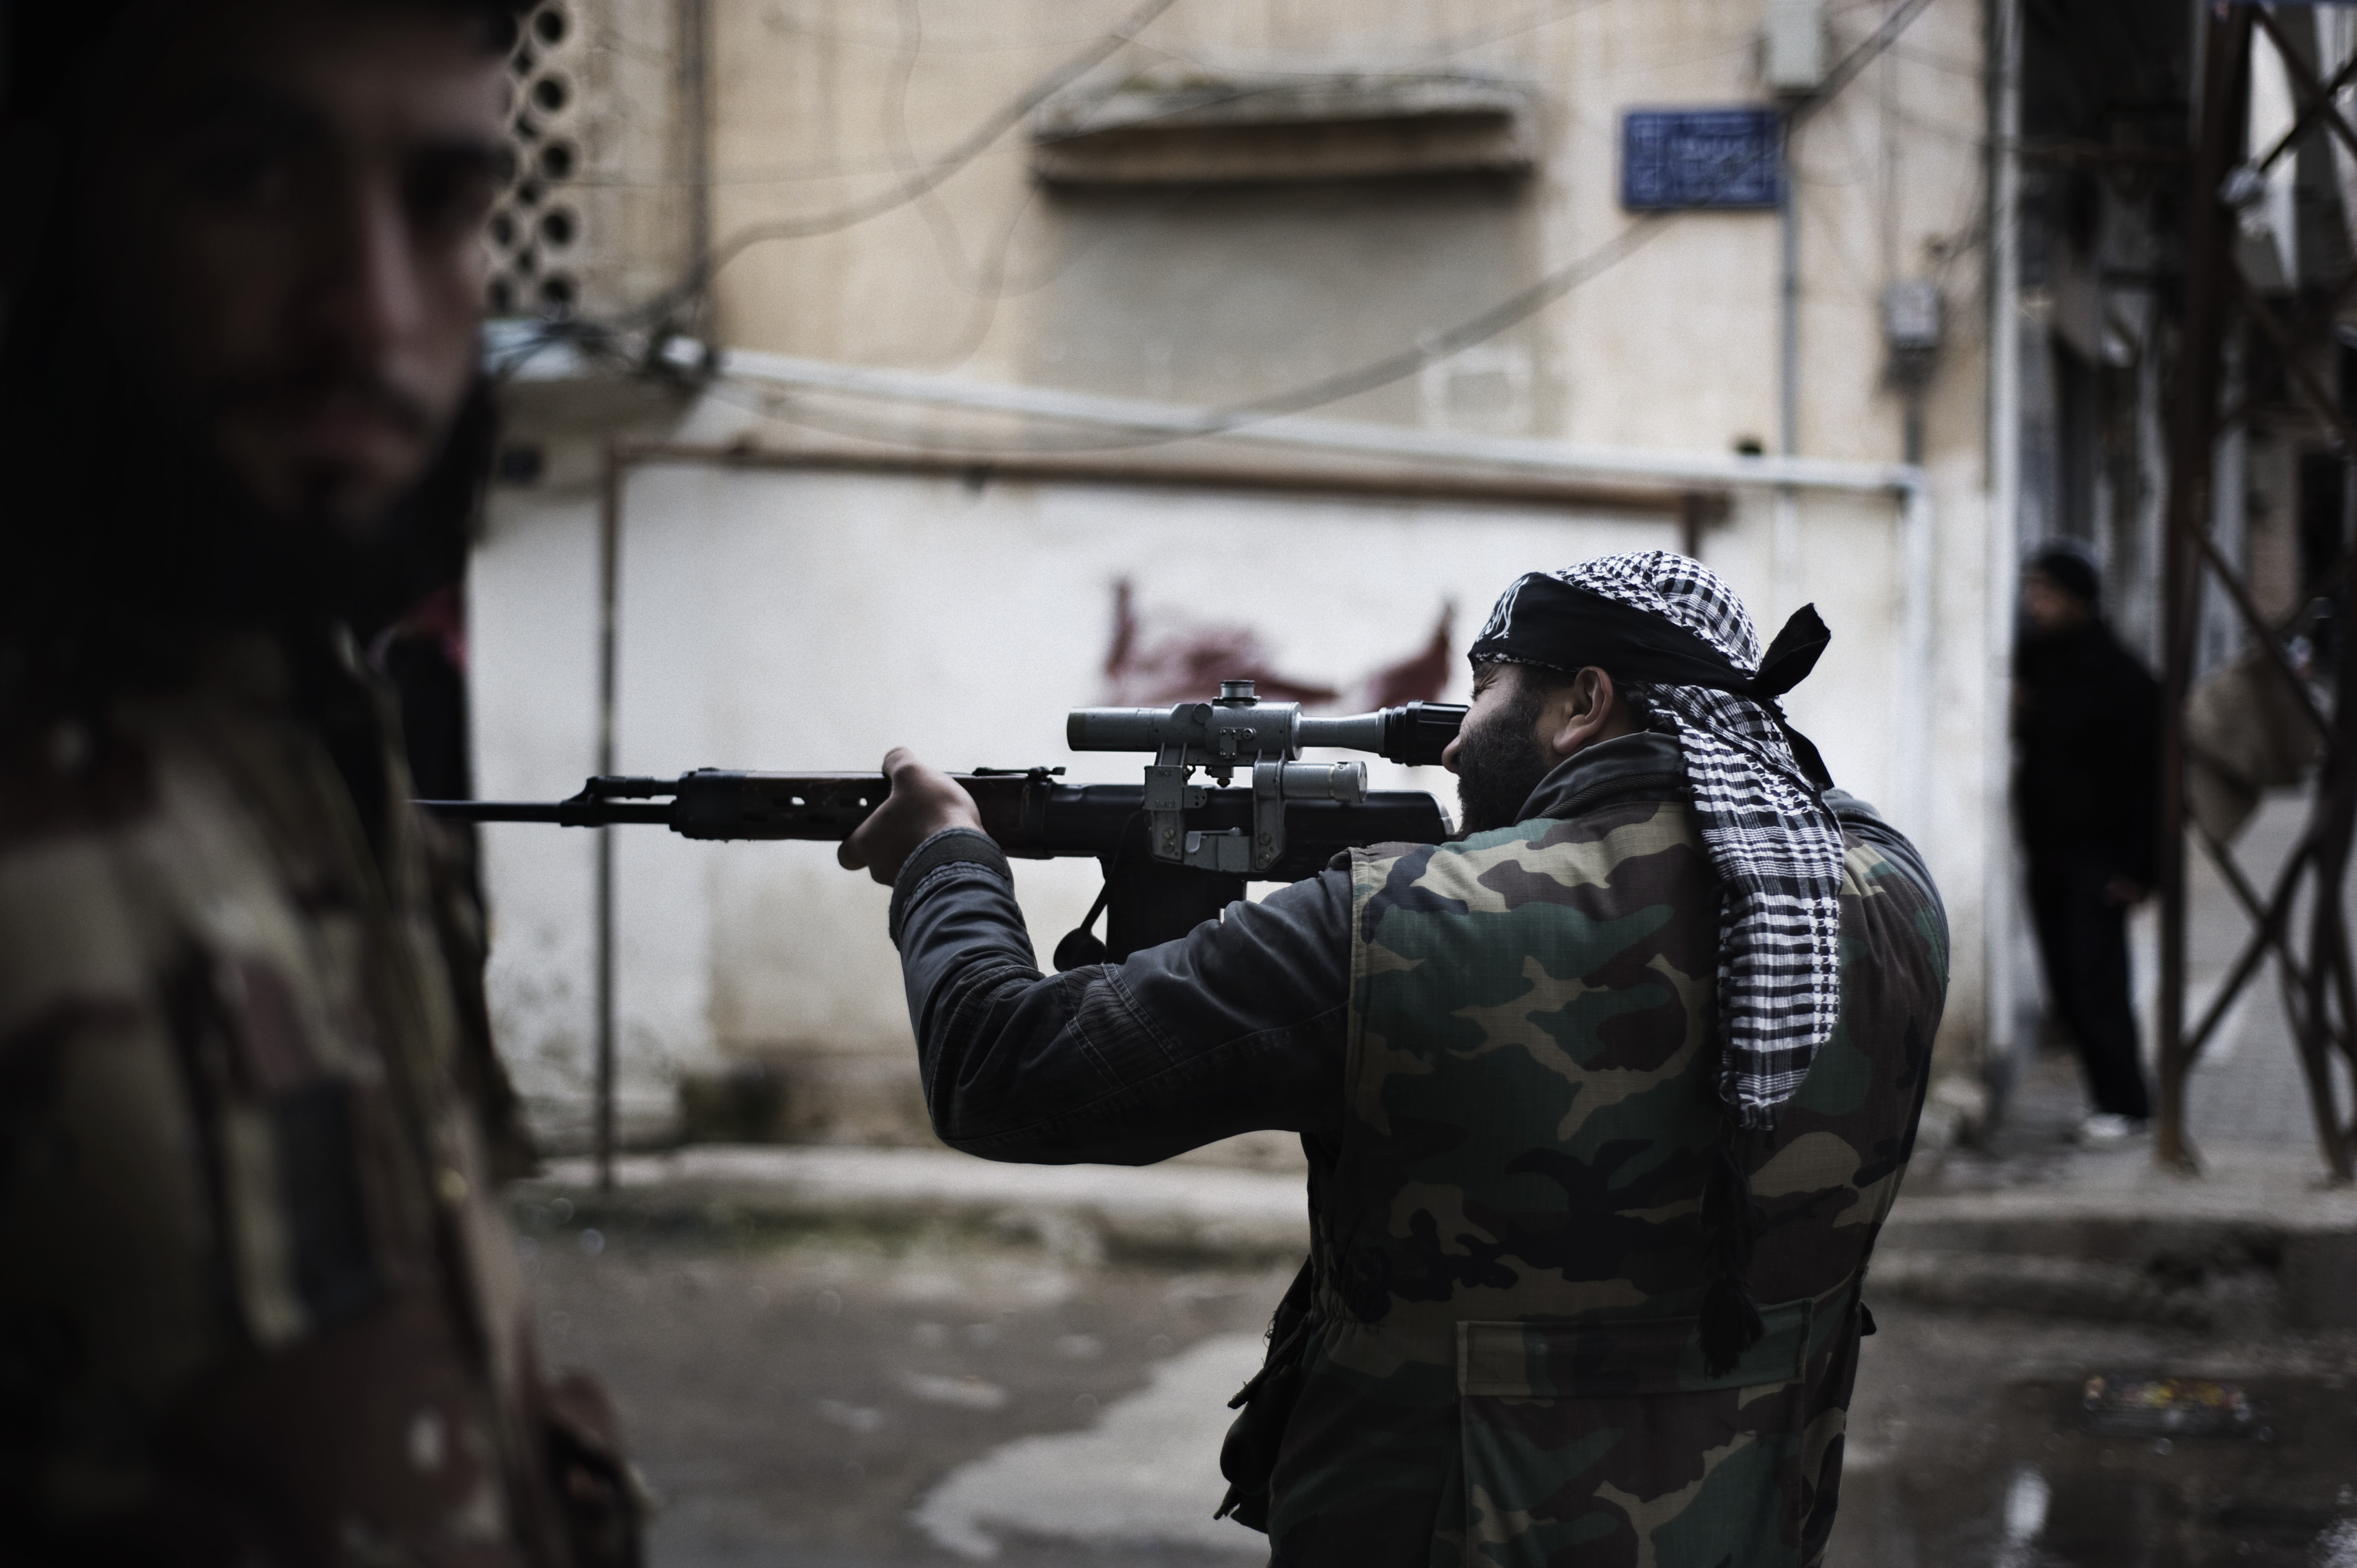 Feb. 24, 2012. A Free Syrian Army fighter is seen as he aims at an Al Assad Forces position in al-Qsair.